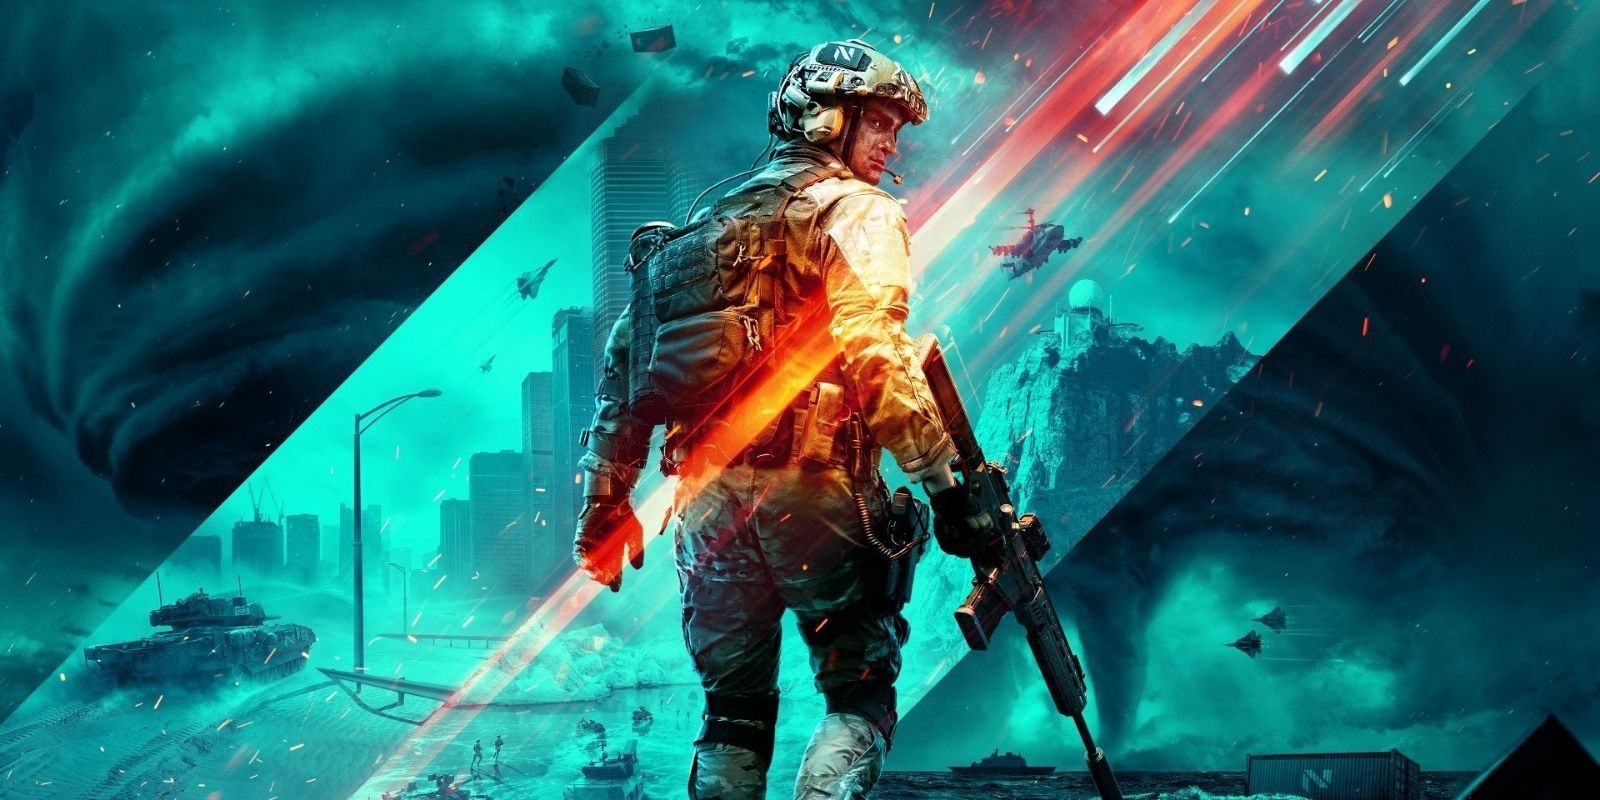 Does the 40 Update Make Battlefield 2042 Playable